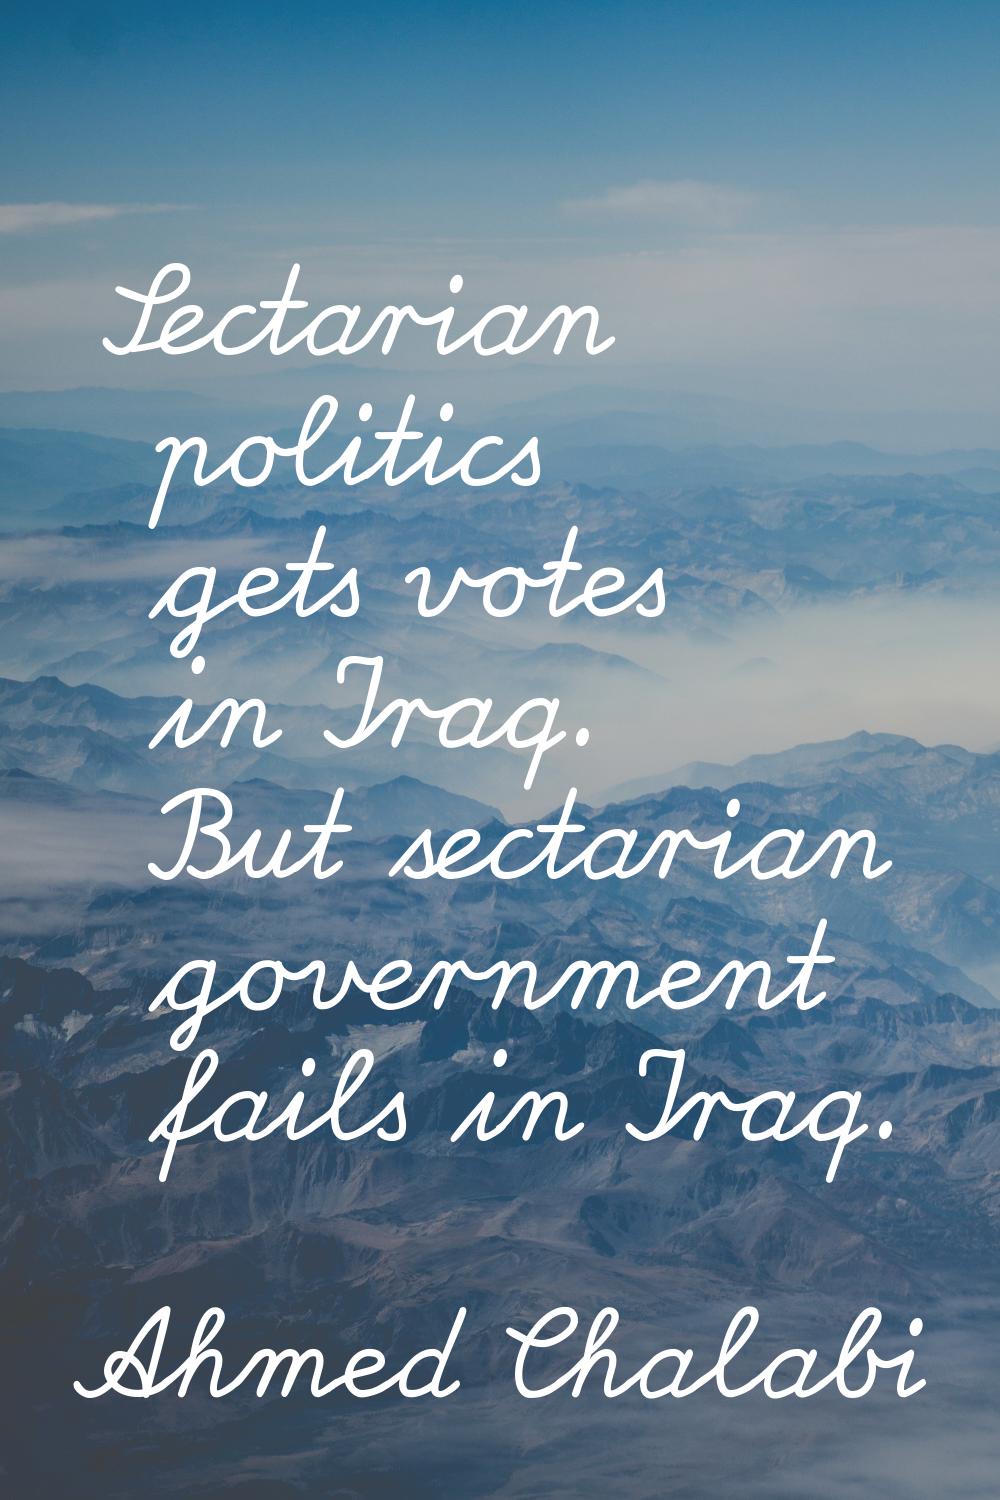 Sectarian politics gets votes in Iraq. But sectarian government fails in Iraq.